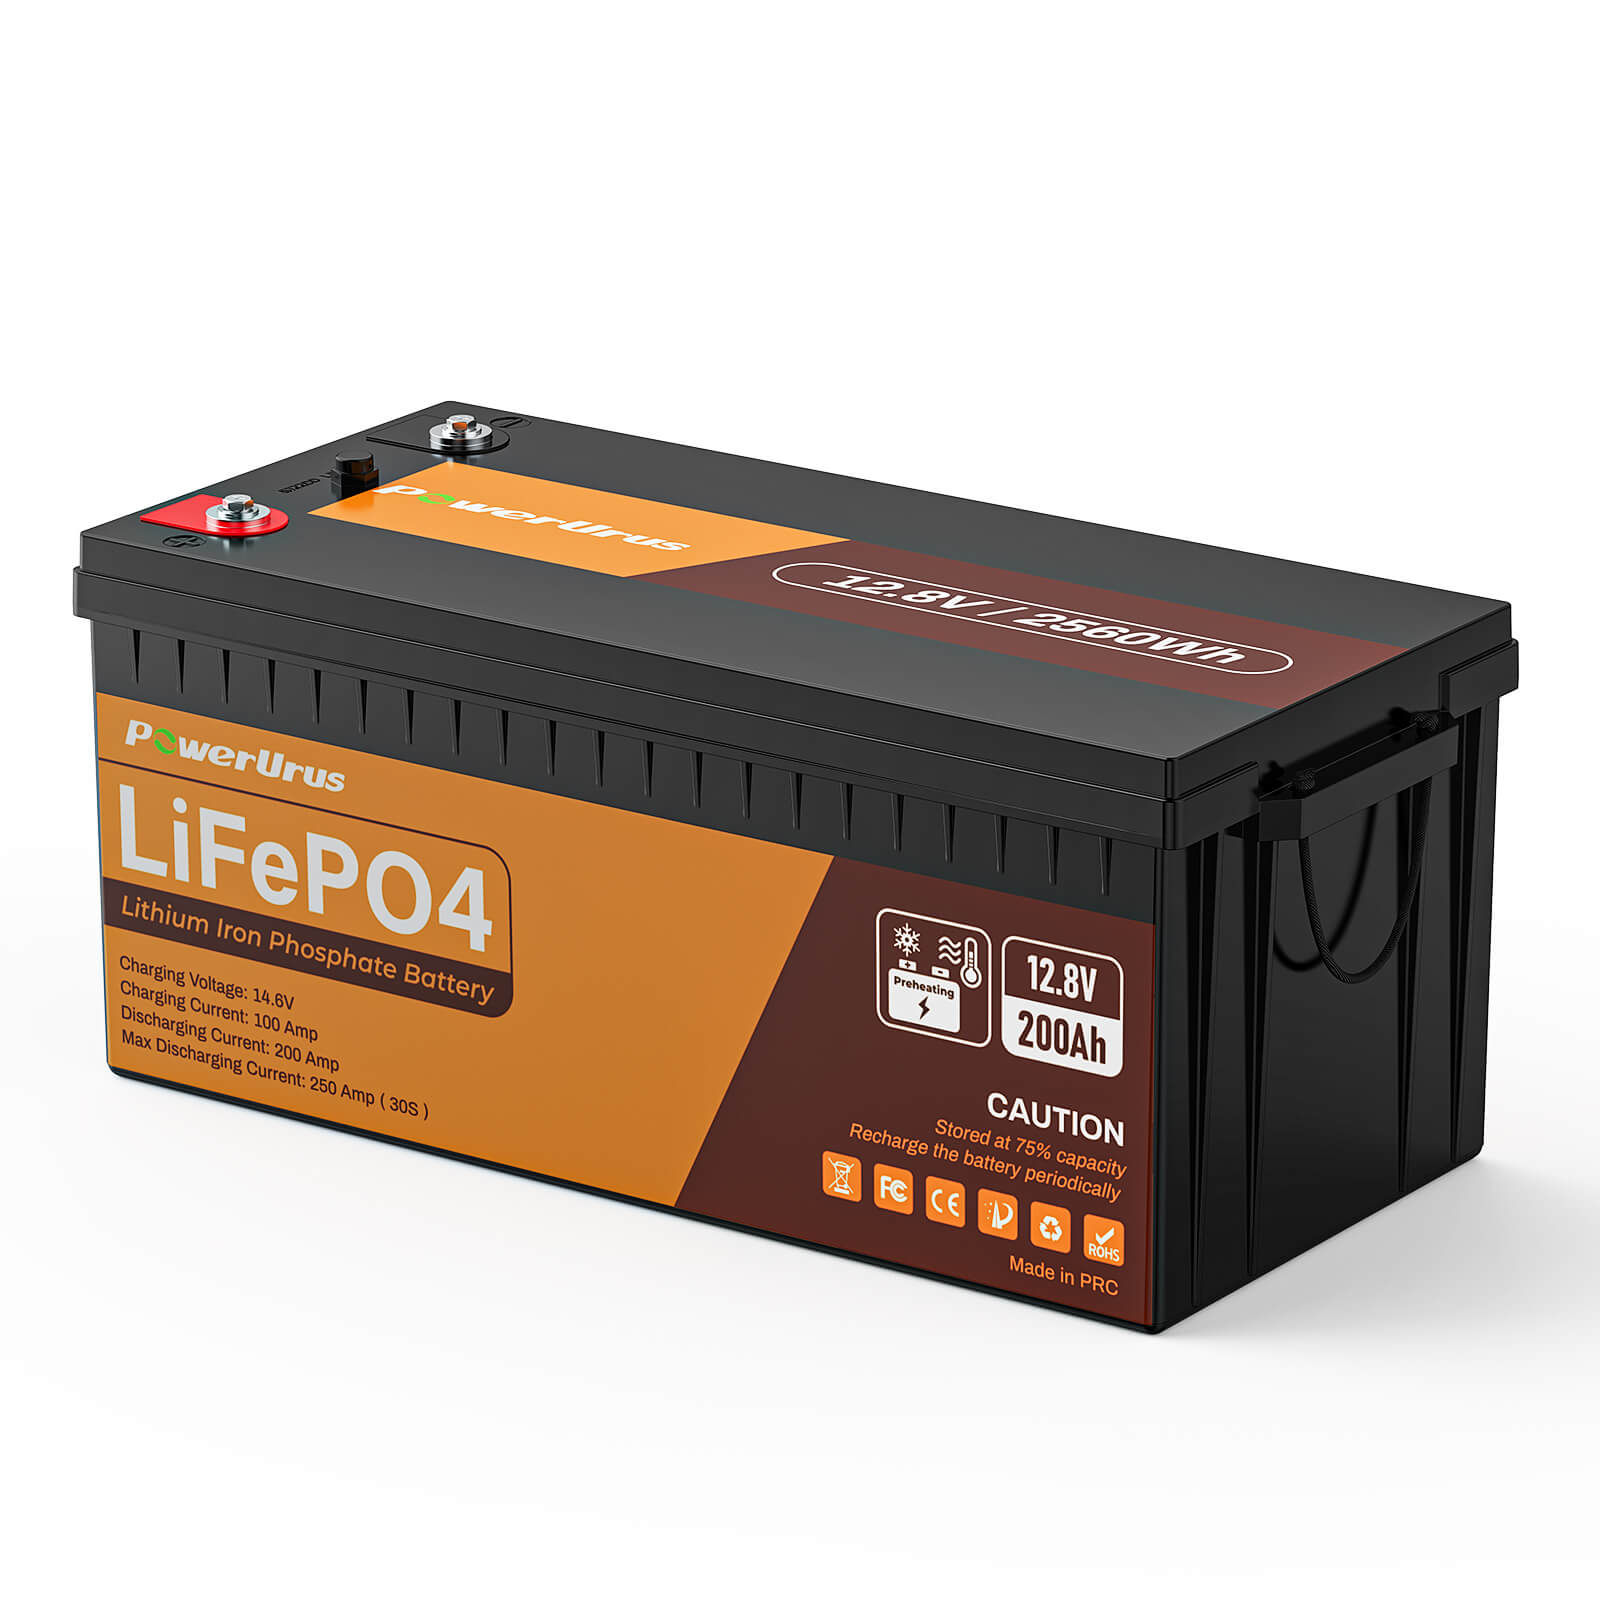 Green Cell LiFePO4 12.8V 200Ah 2560Wh battery for solar panels and